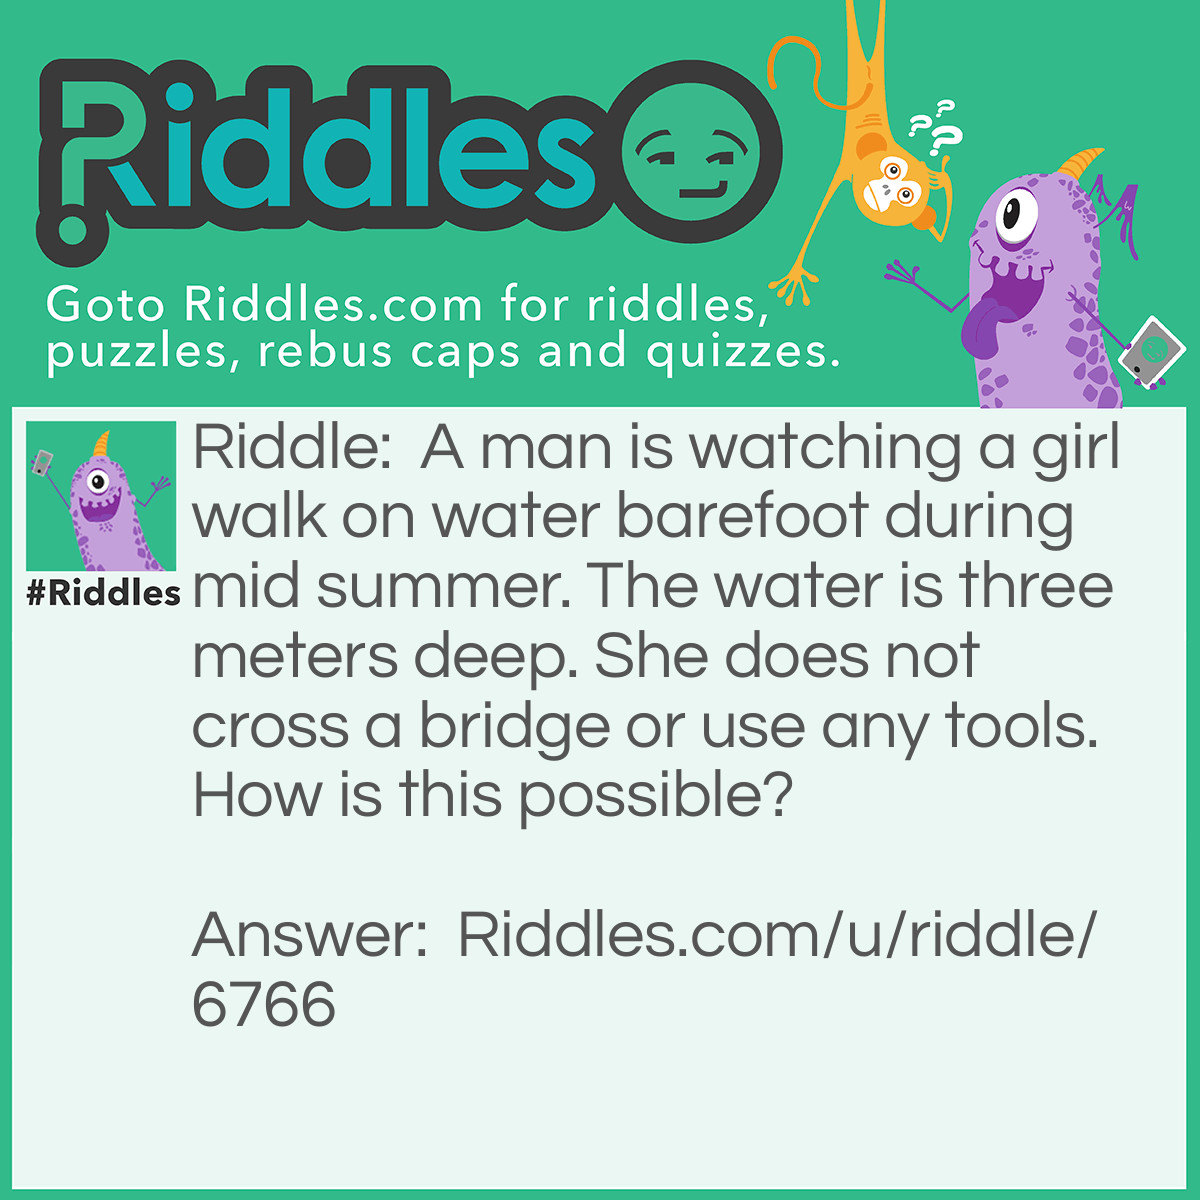 Riddle: A man is watching a girl walk on water barefoot during mid summer. The water is three meters deep. She does not cross a bridge or use any tools. How is this possible? Answer: The girl is waking on frozen water in winter, As he watches her on TV from a summer time zone.